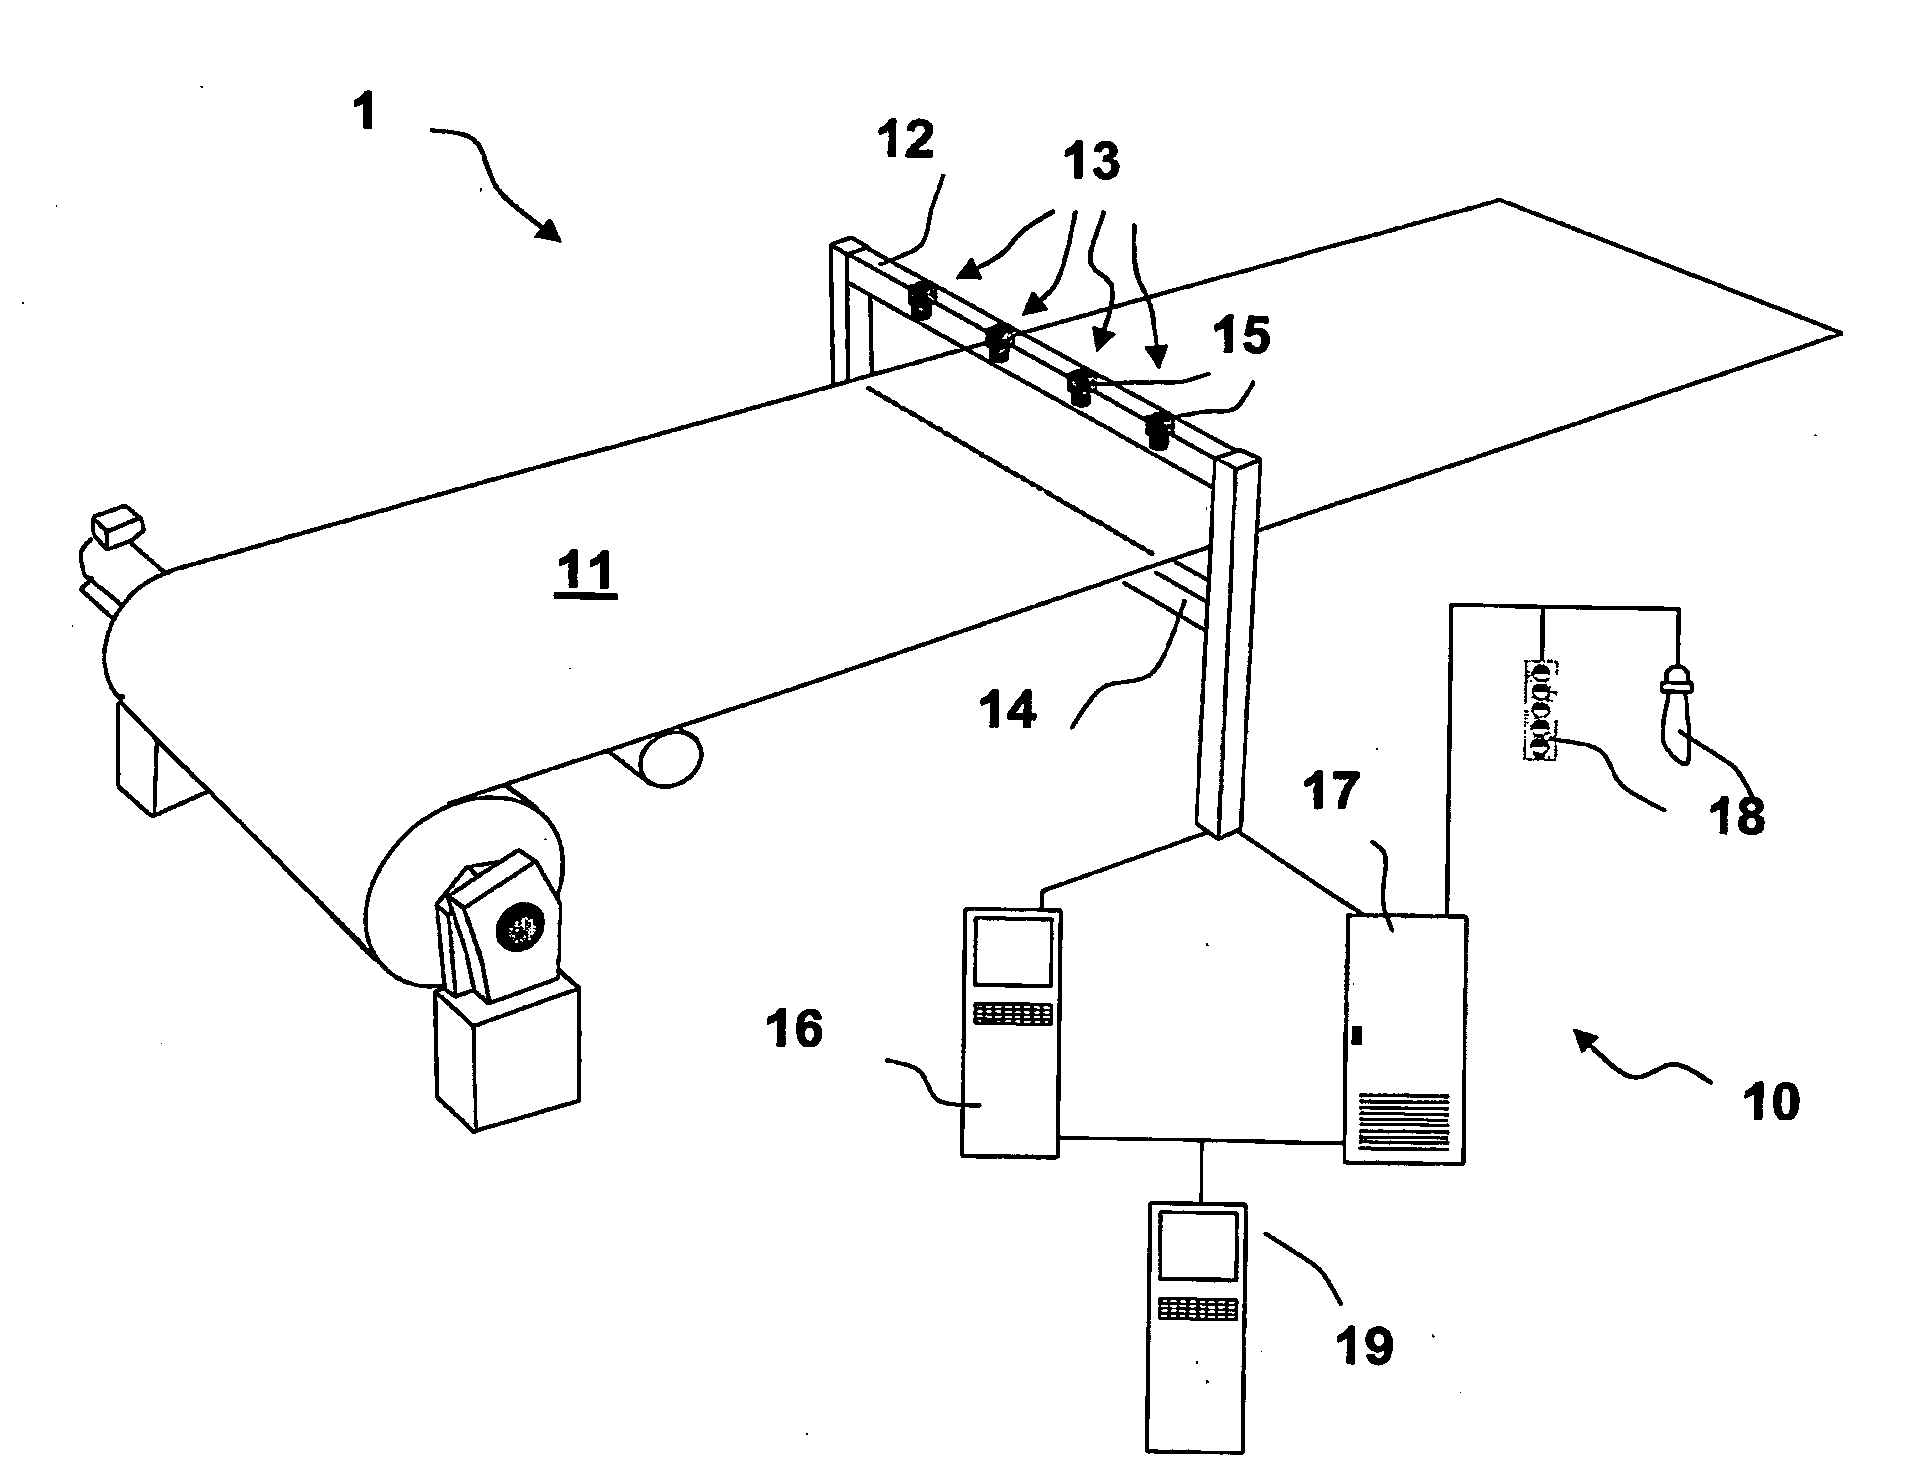 Method and Product for Detecting Abnormalities